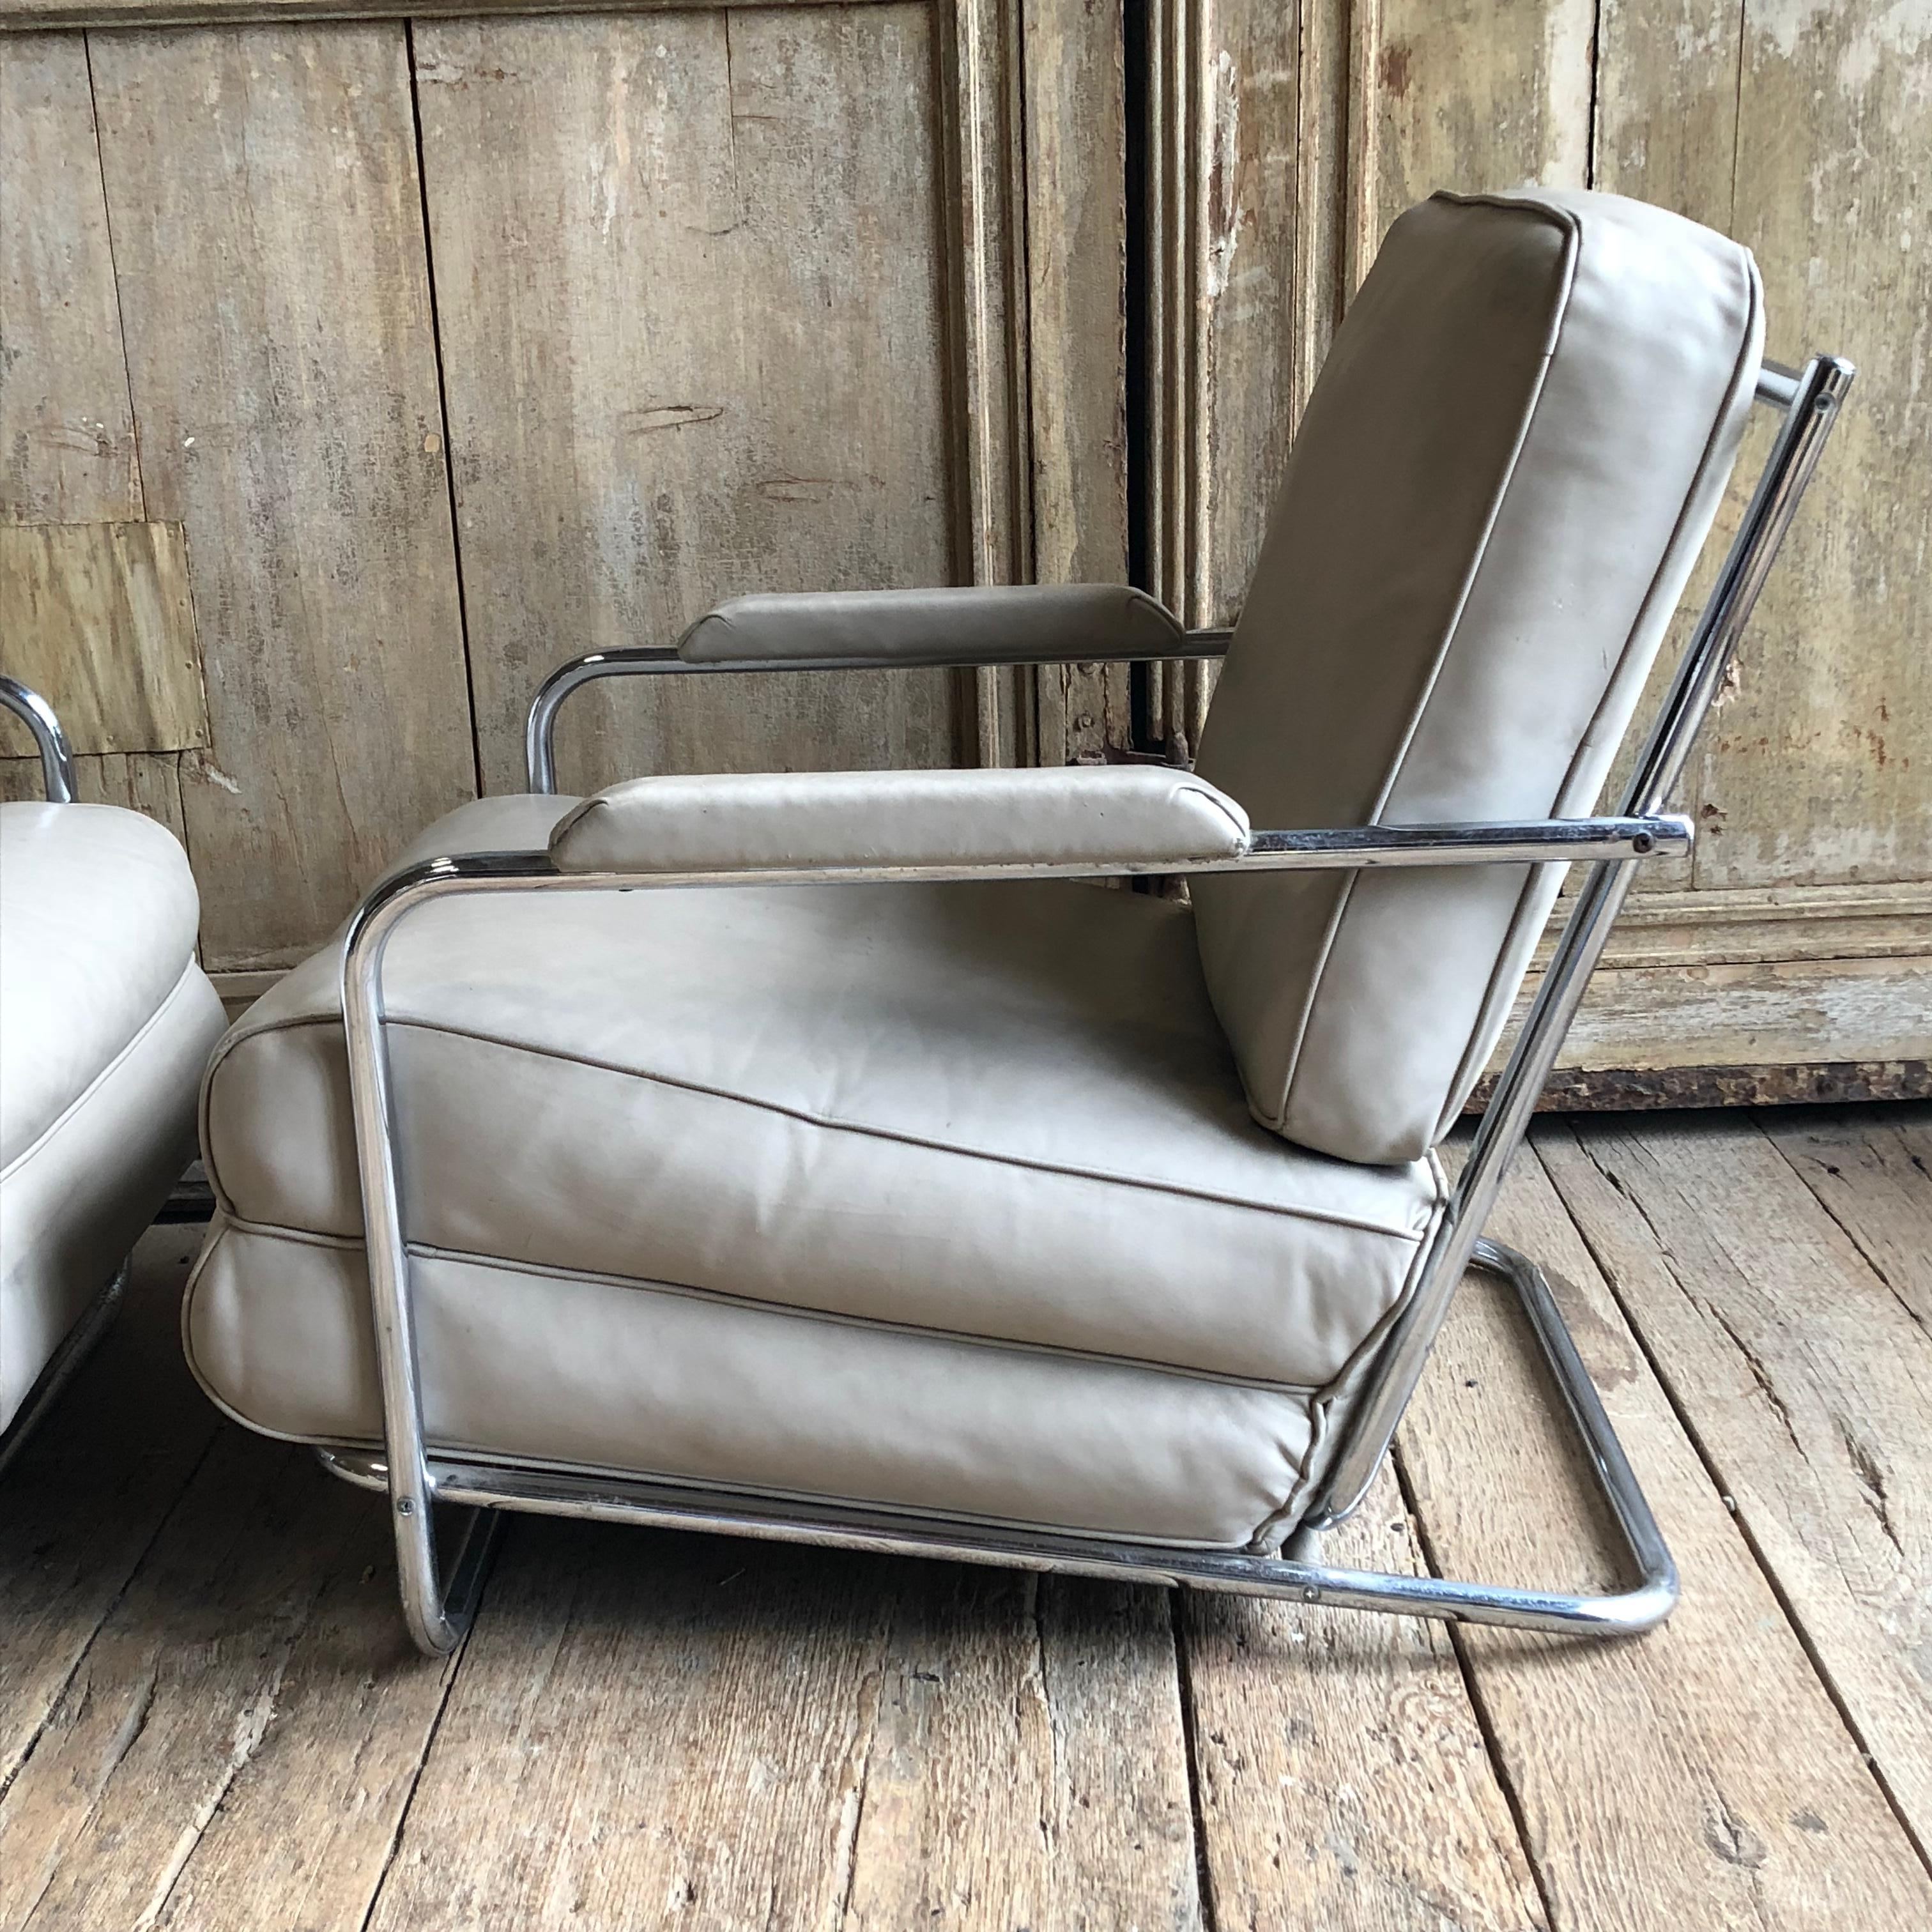 20th Century Pair of Gilbert Rohde Lounge Chairs In Chrome and Leather